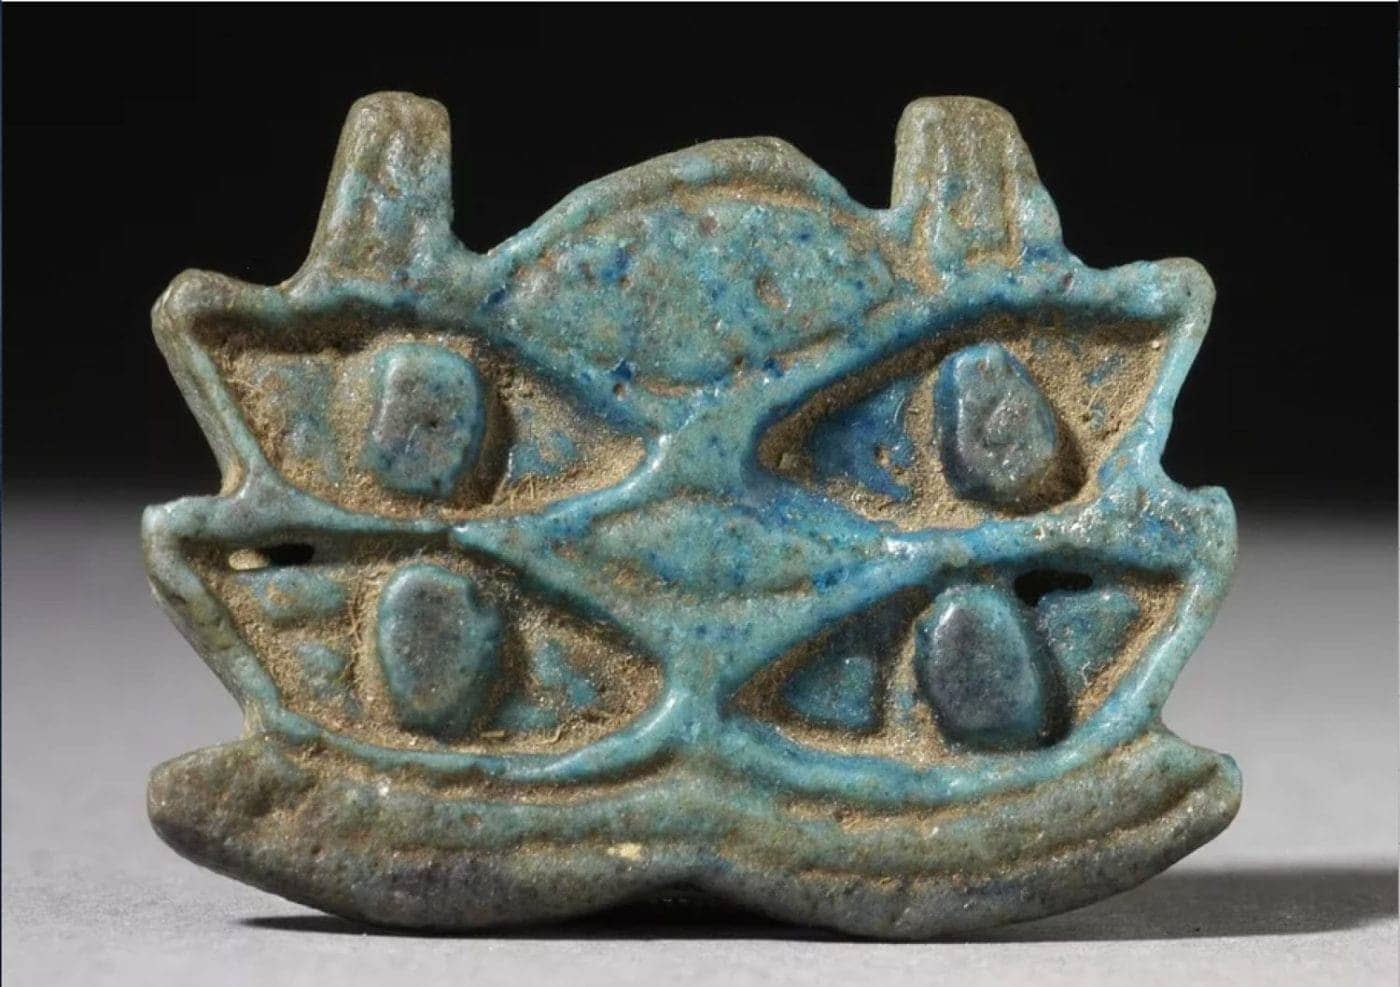 Multiple-Eye-of-Horus-Amulet-Egypt-724-31-B.C.E.-Photo-Los-Angeles-County-Museum-of-Art.-1400x987, <strong>Evil eye – modern surveillance</strong>, Abolition Now! 